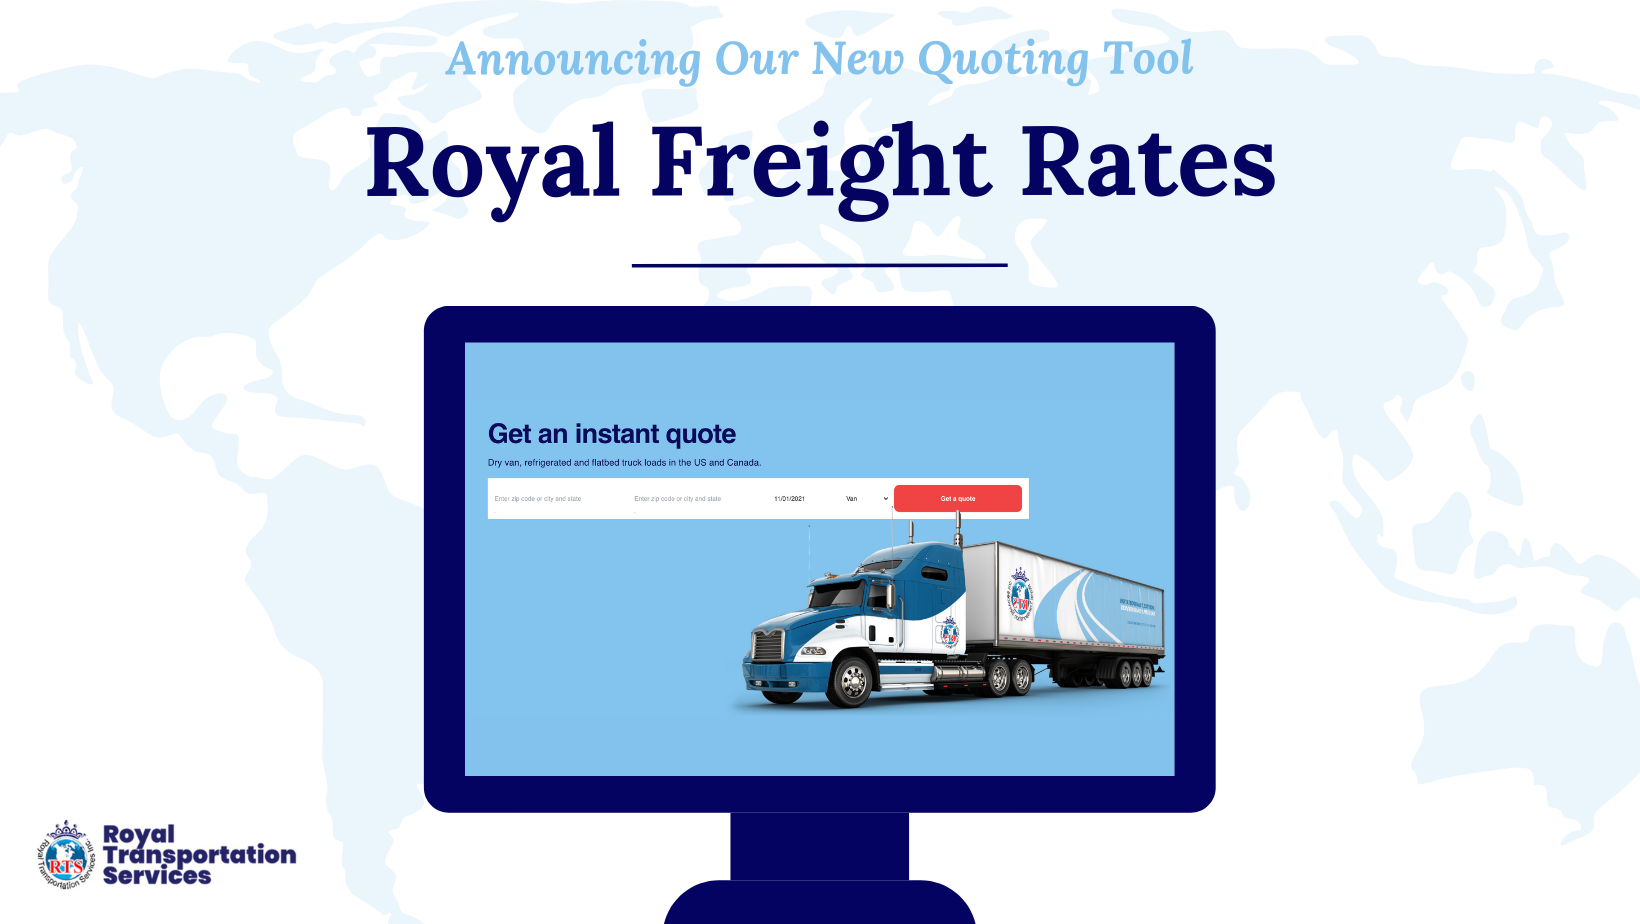 Royal Freight Rates Announcement Image